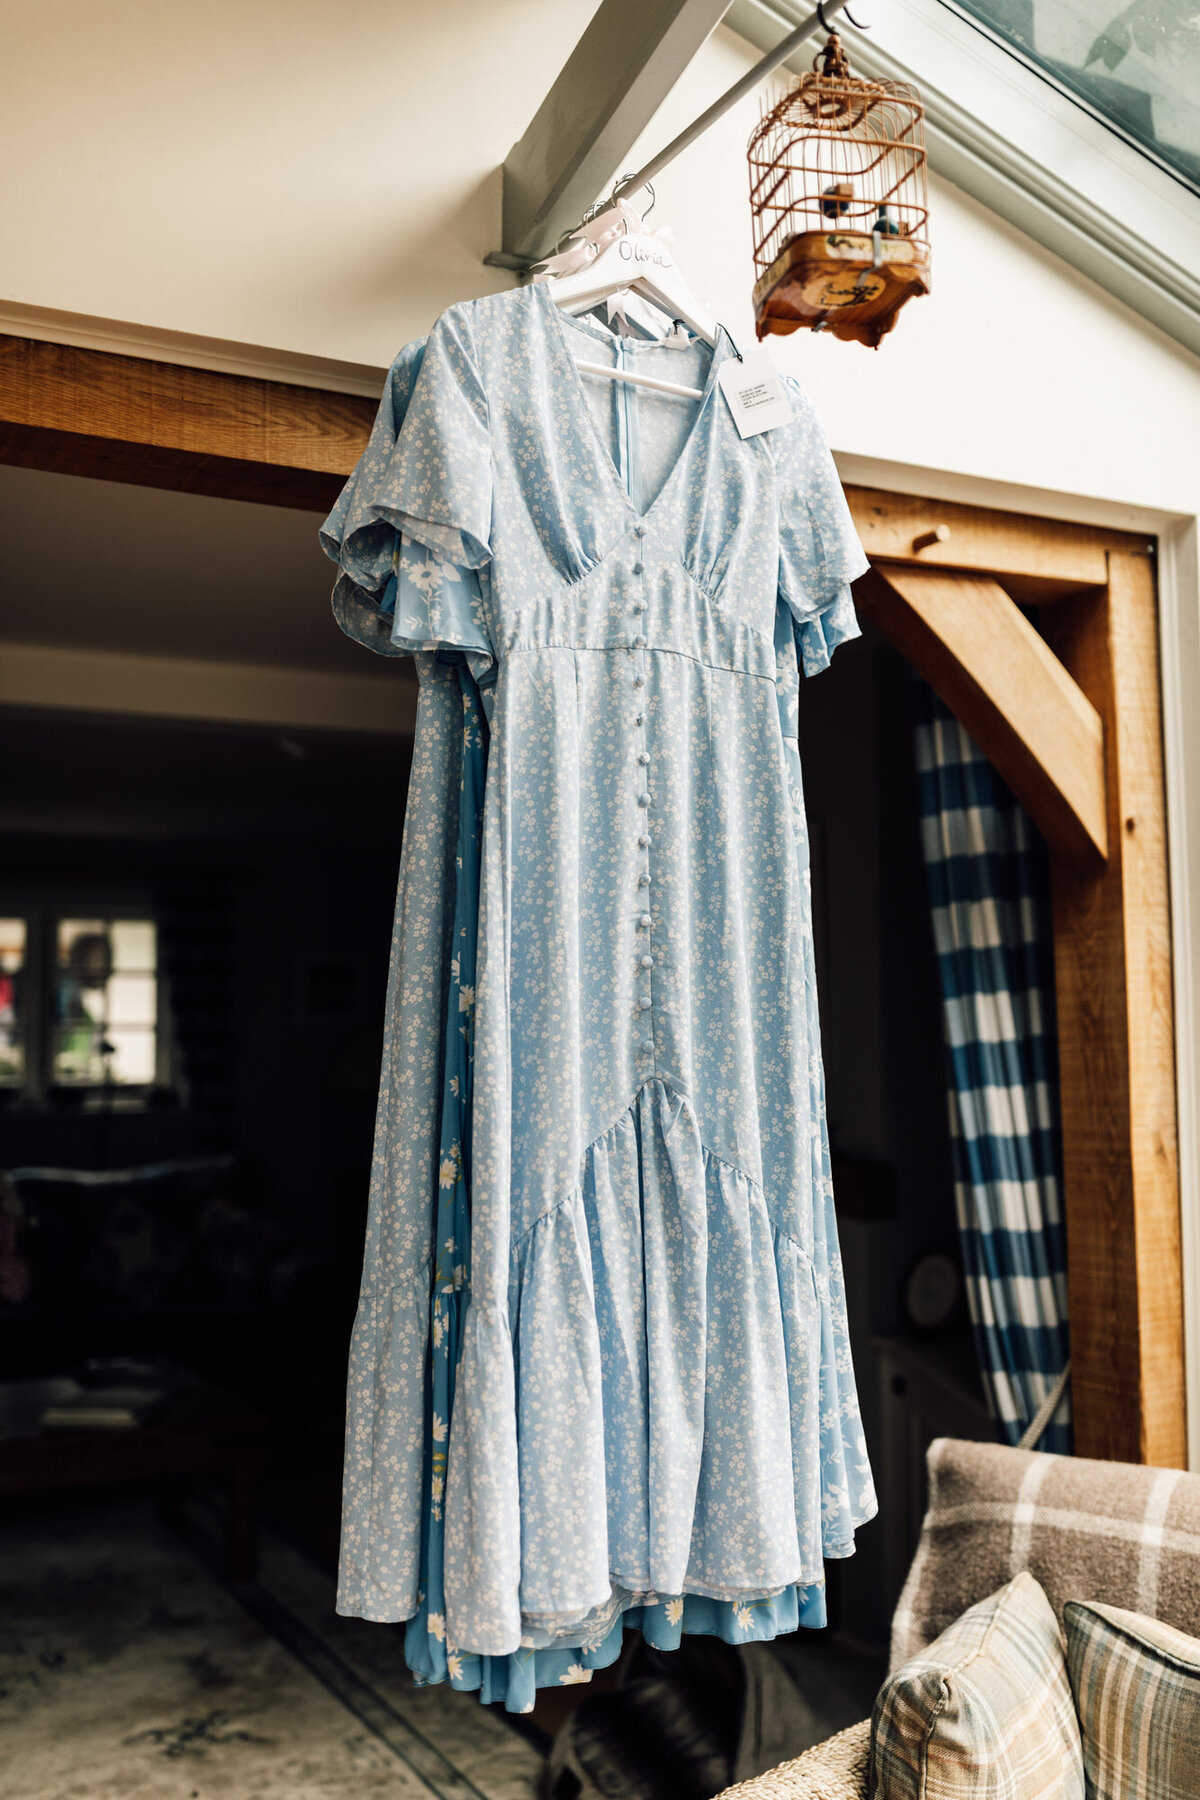 Photo of light blue dress hanging up before being put on